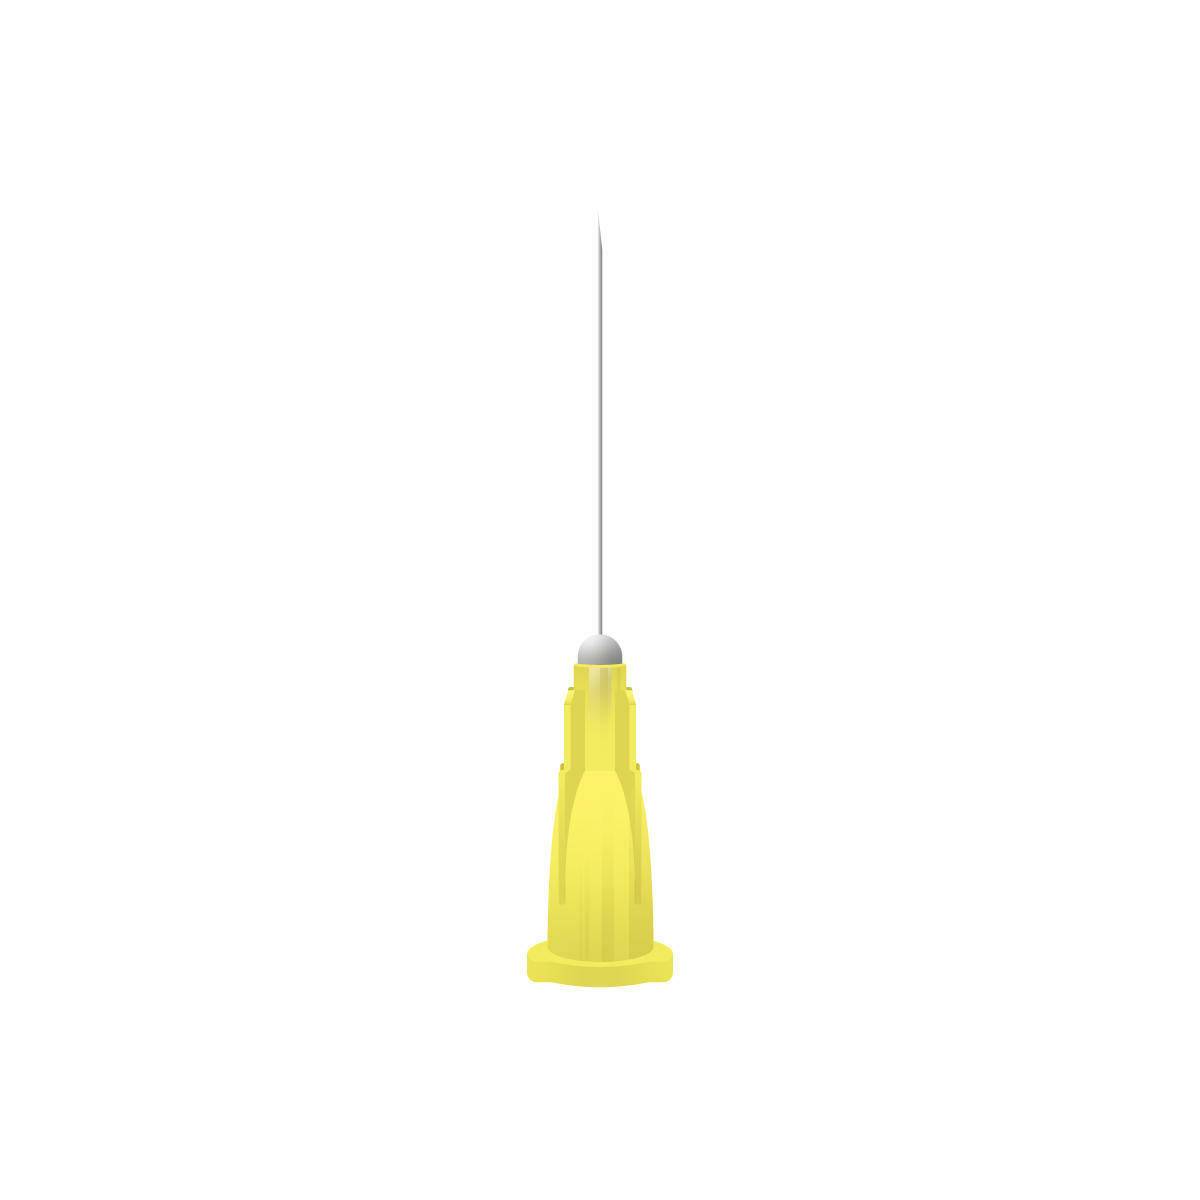 30g Yellow 25mm Meso-relle Mesotherapy Needle